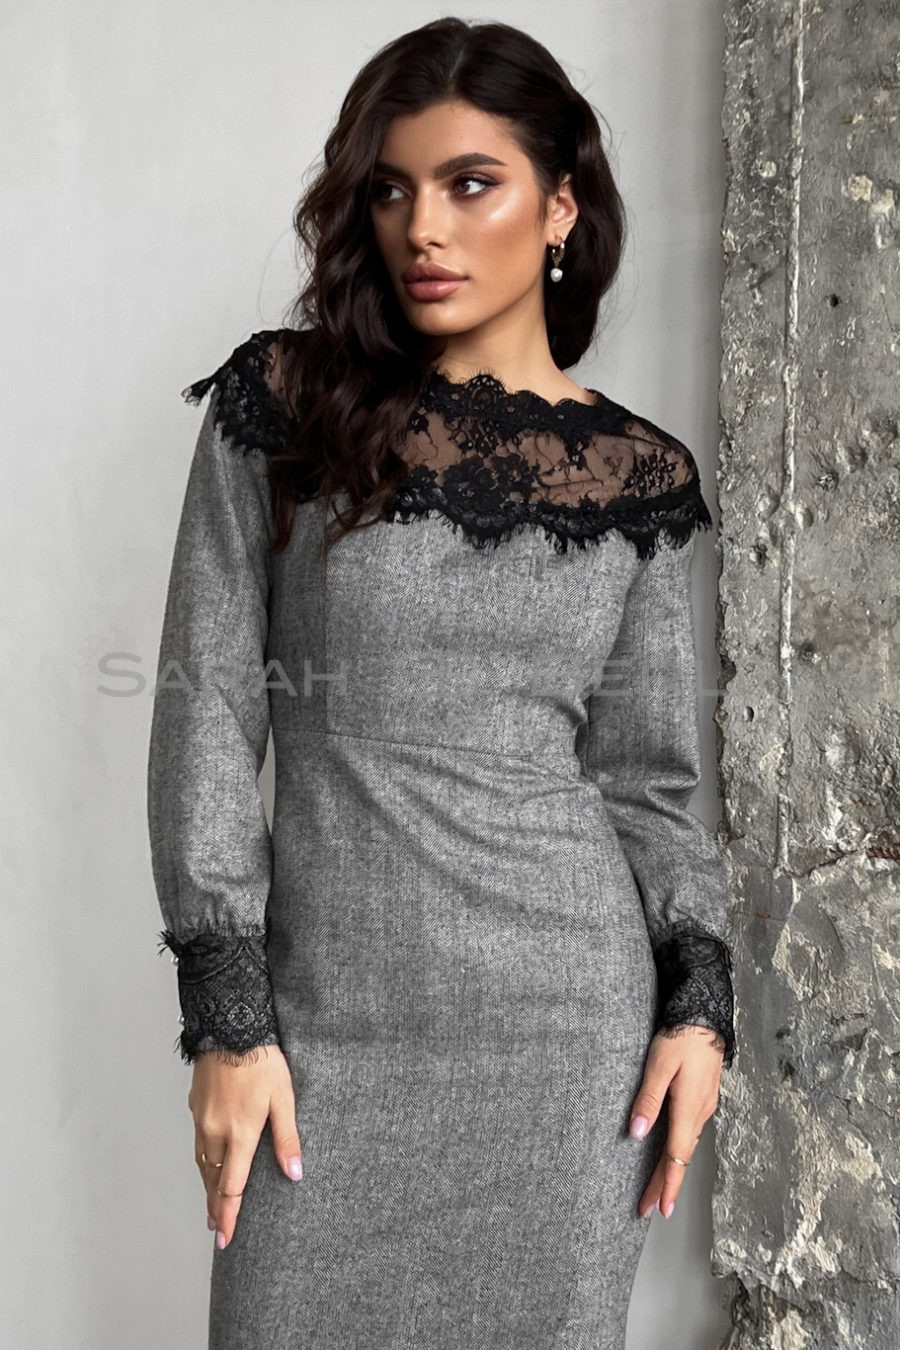 Tweed silhouette dress with lace yoke